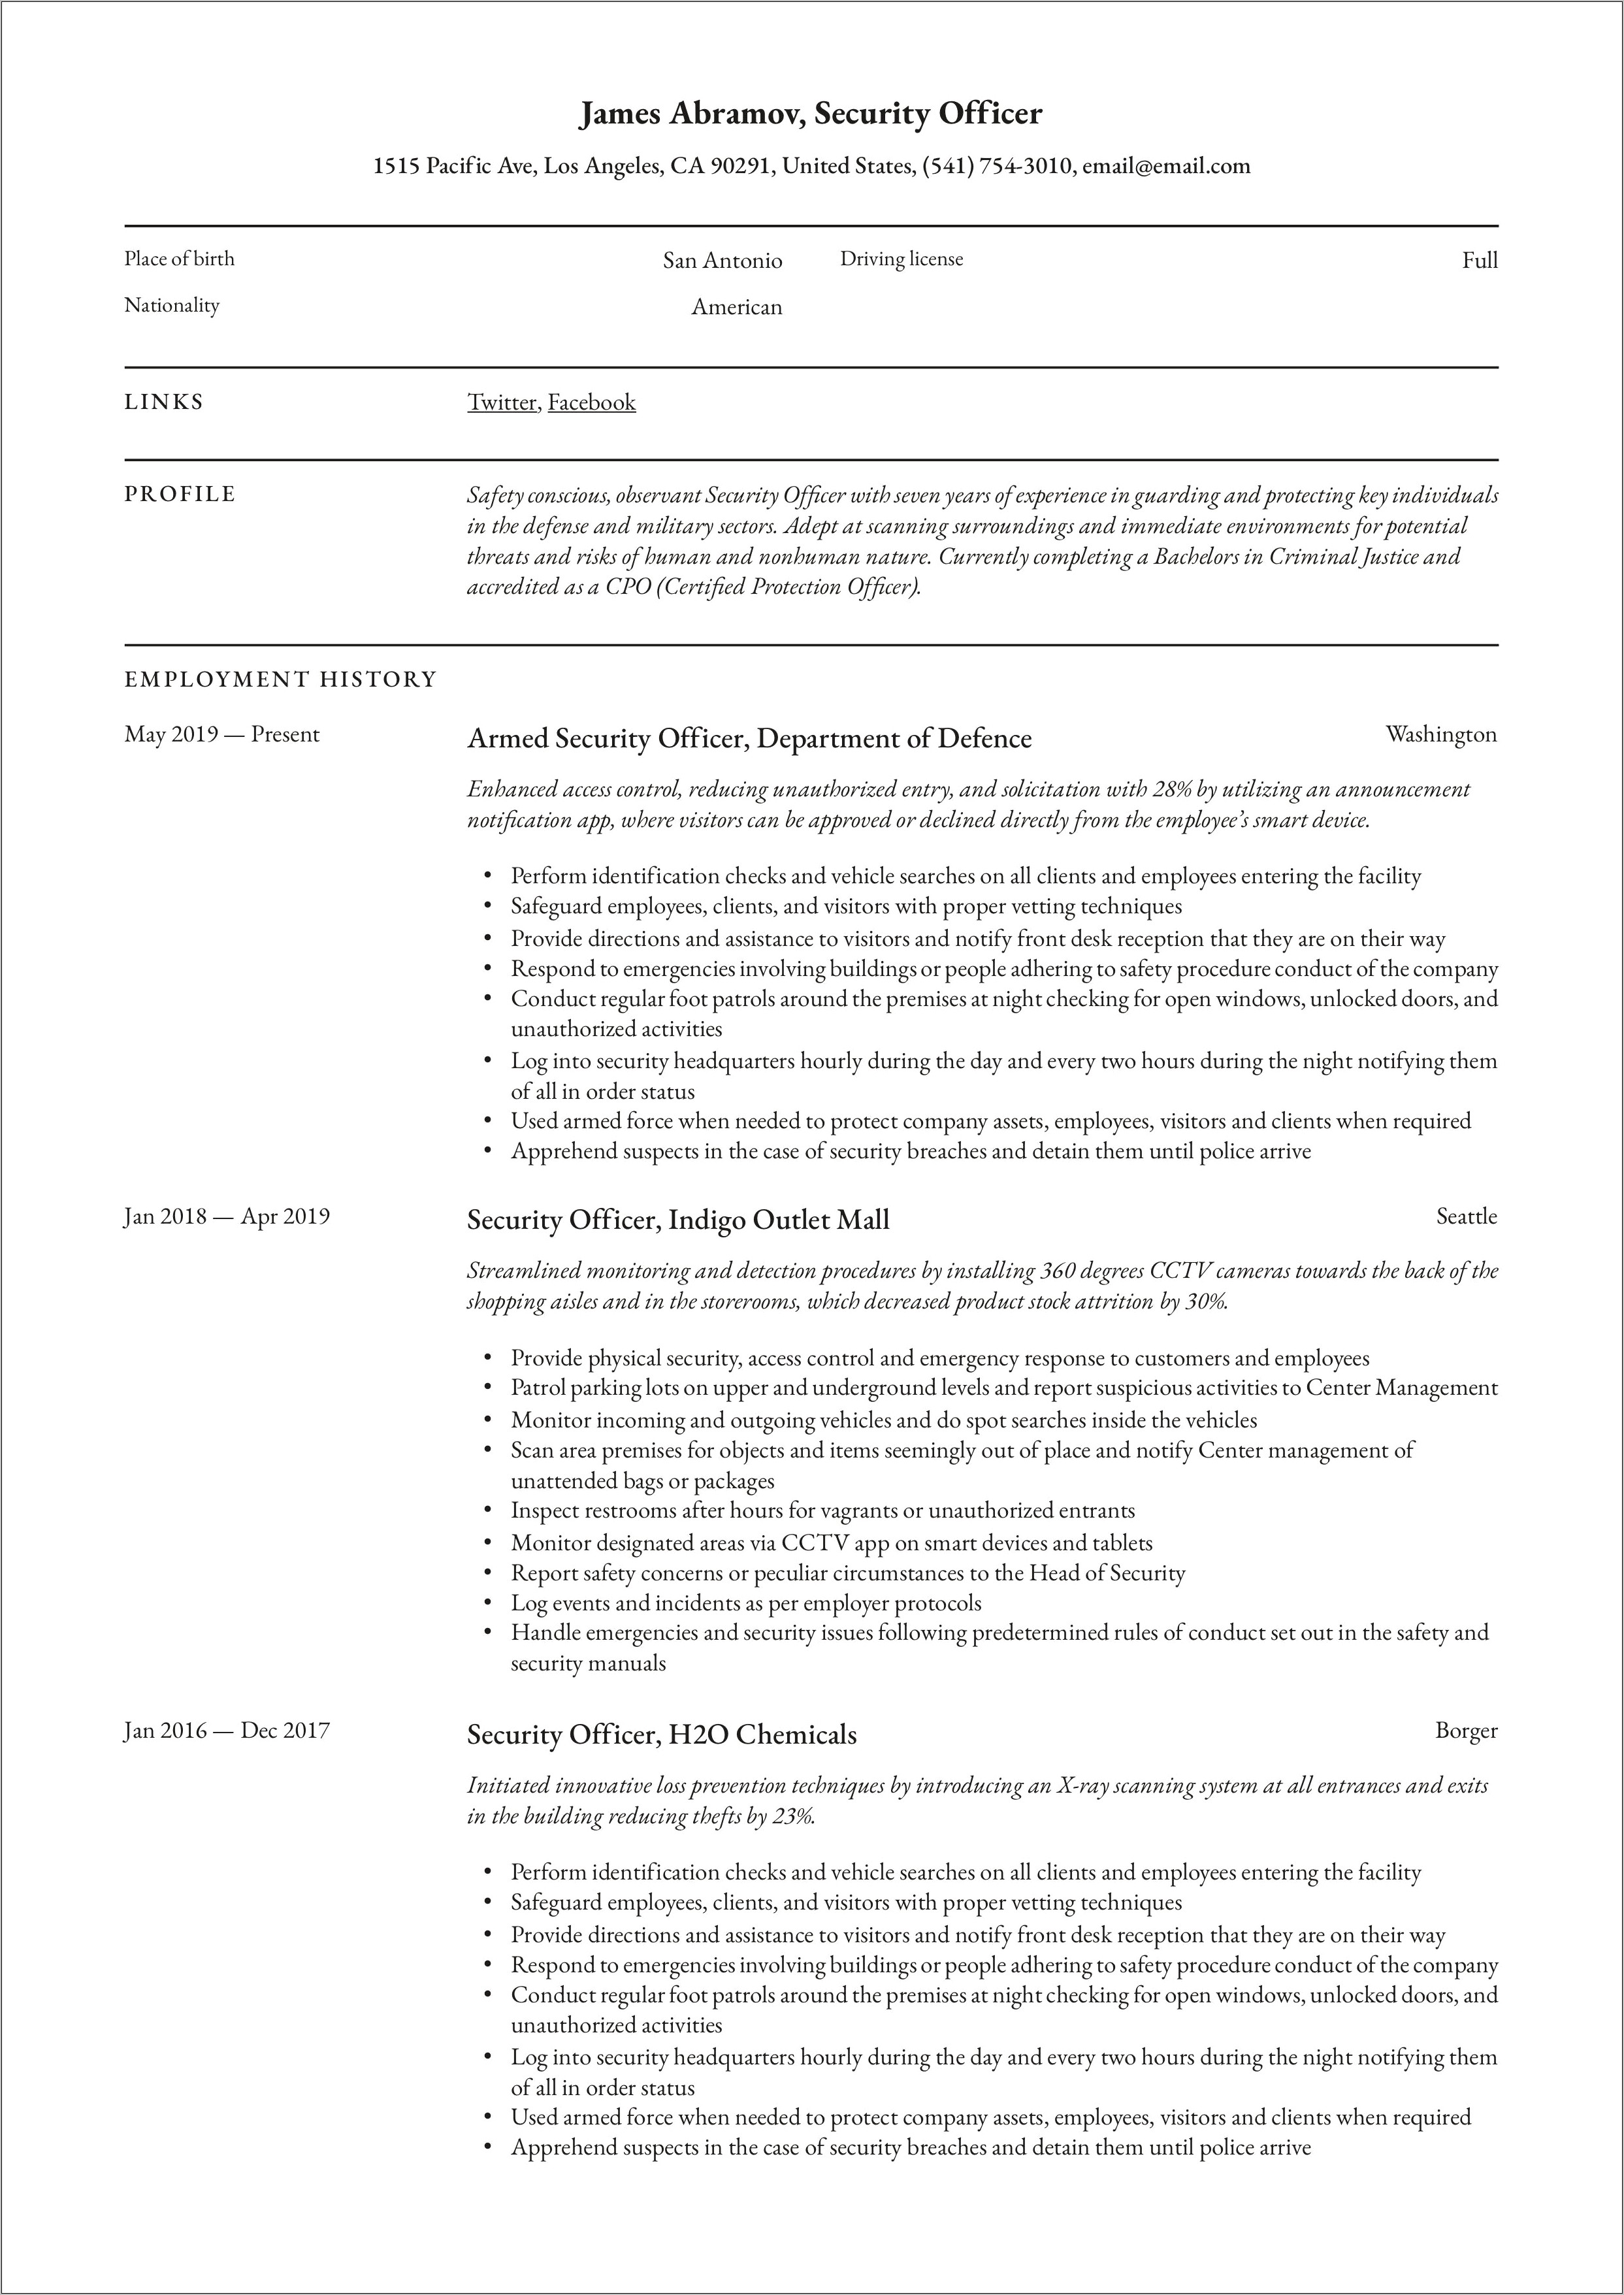 Resume Objective Statement For Loss Prevention